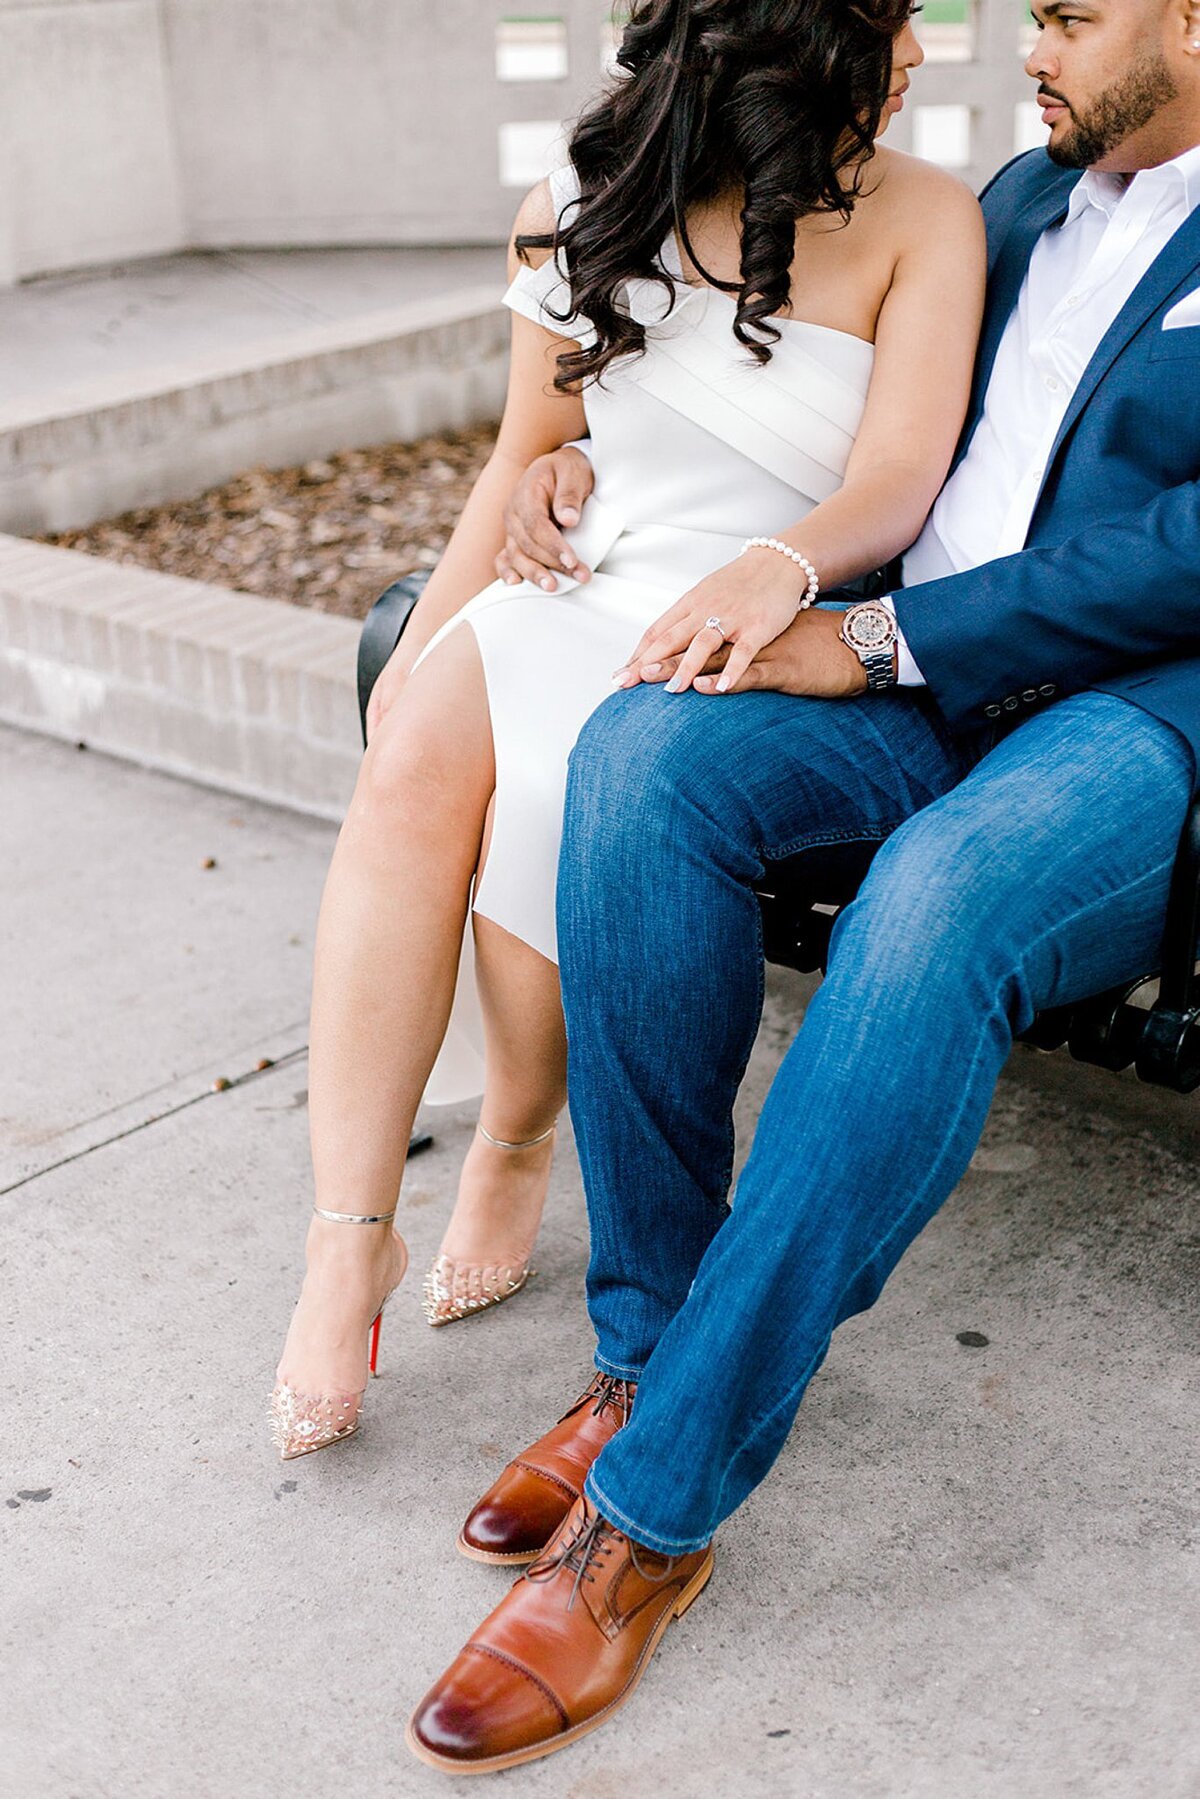 luxury downtown dallas engagement session texas wedding photographer_1094